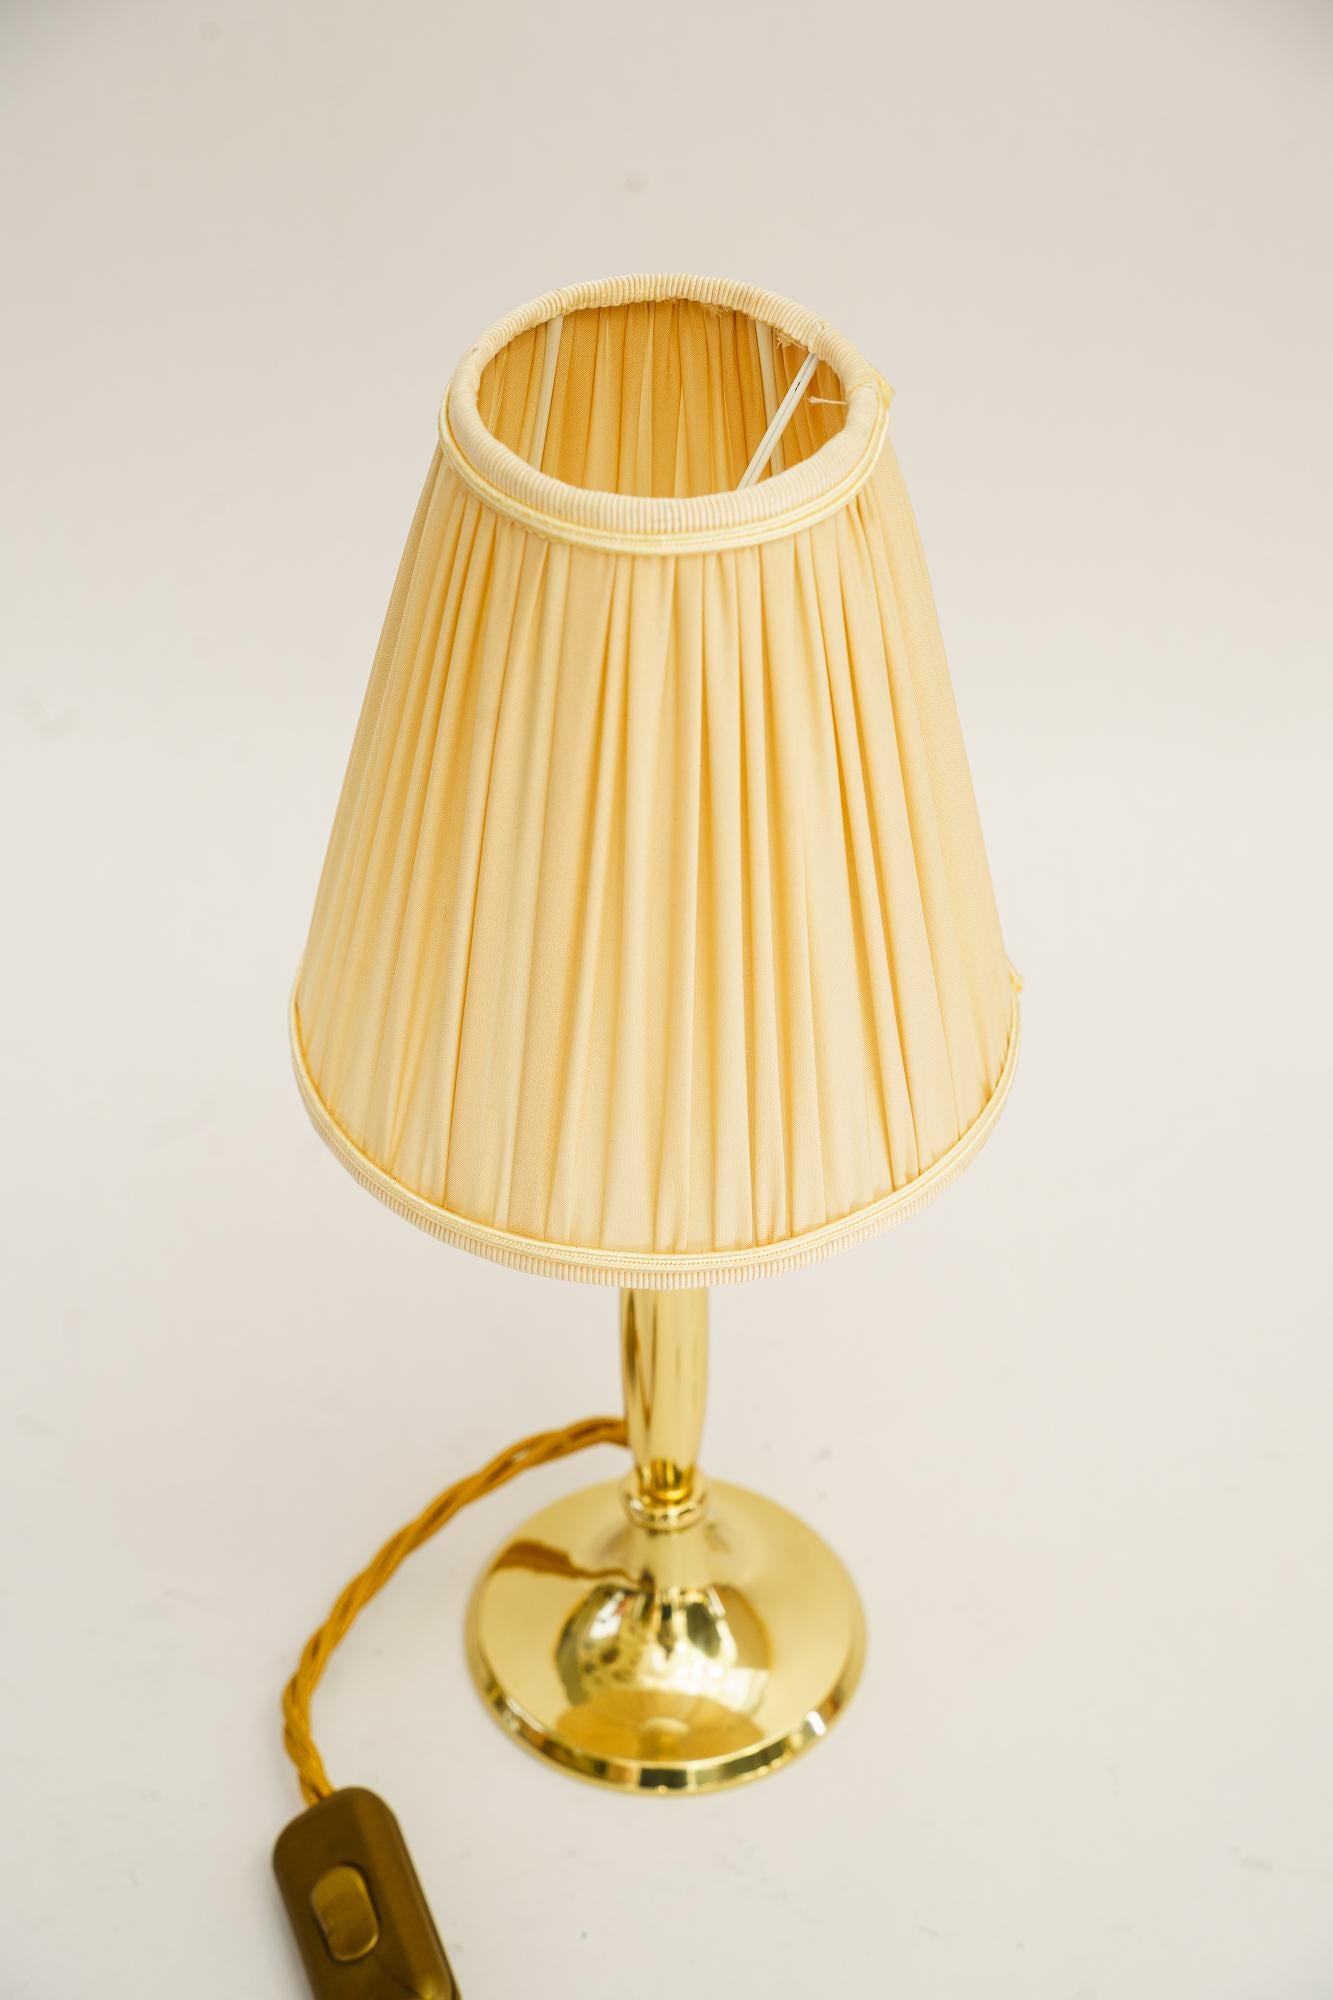 Small Table lamp with fabric shade vienna around 1950s
Brass polished and stove enameled
The fabric shade is replaced ( new )